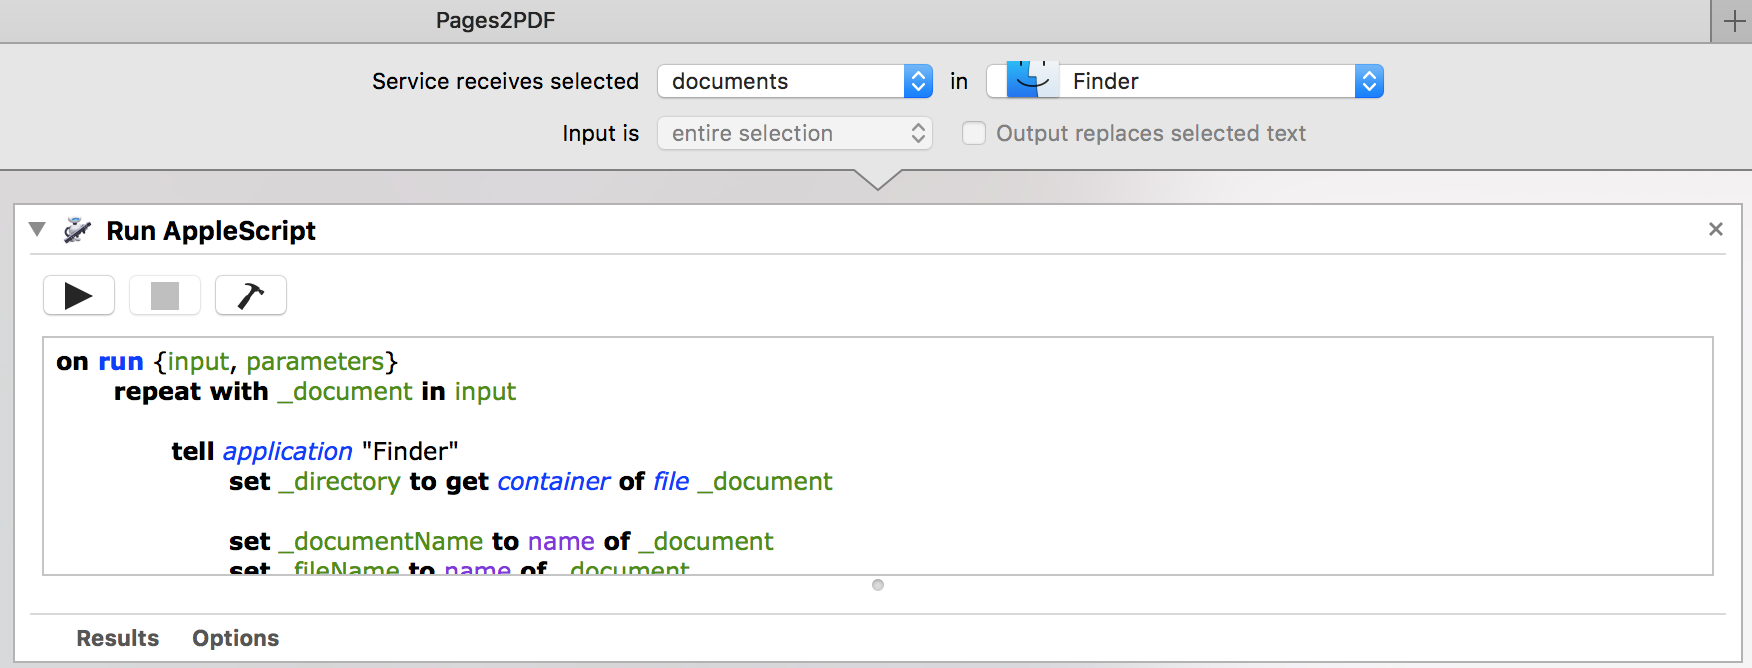 A service in Automator, which uses selected documents in Finder as input for the AppleScript